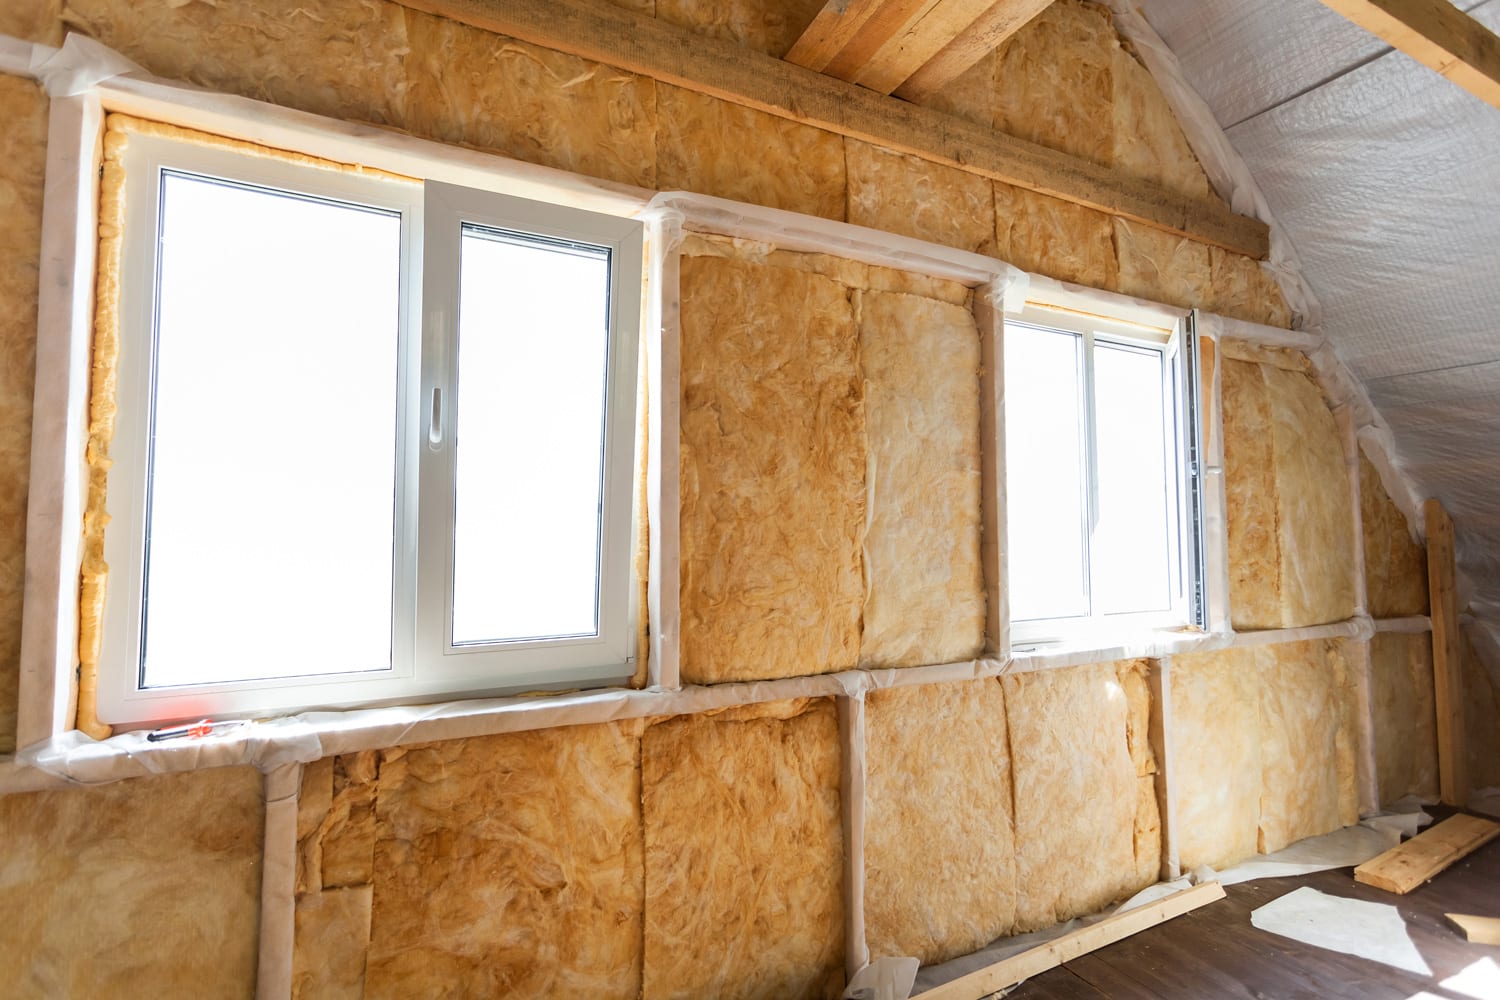 Inside wall heat isolation with mineral wool in wooden house, building under construction